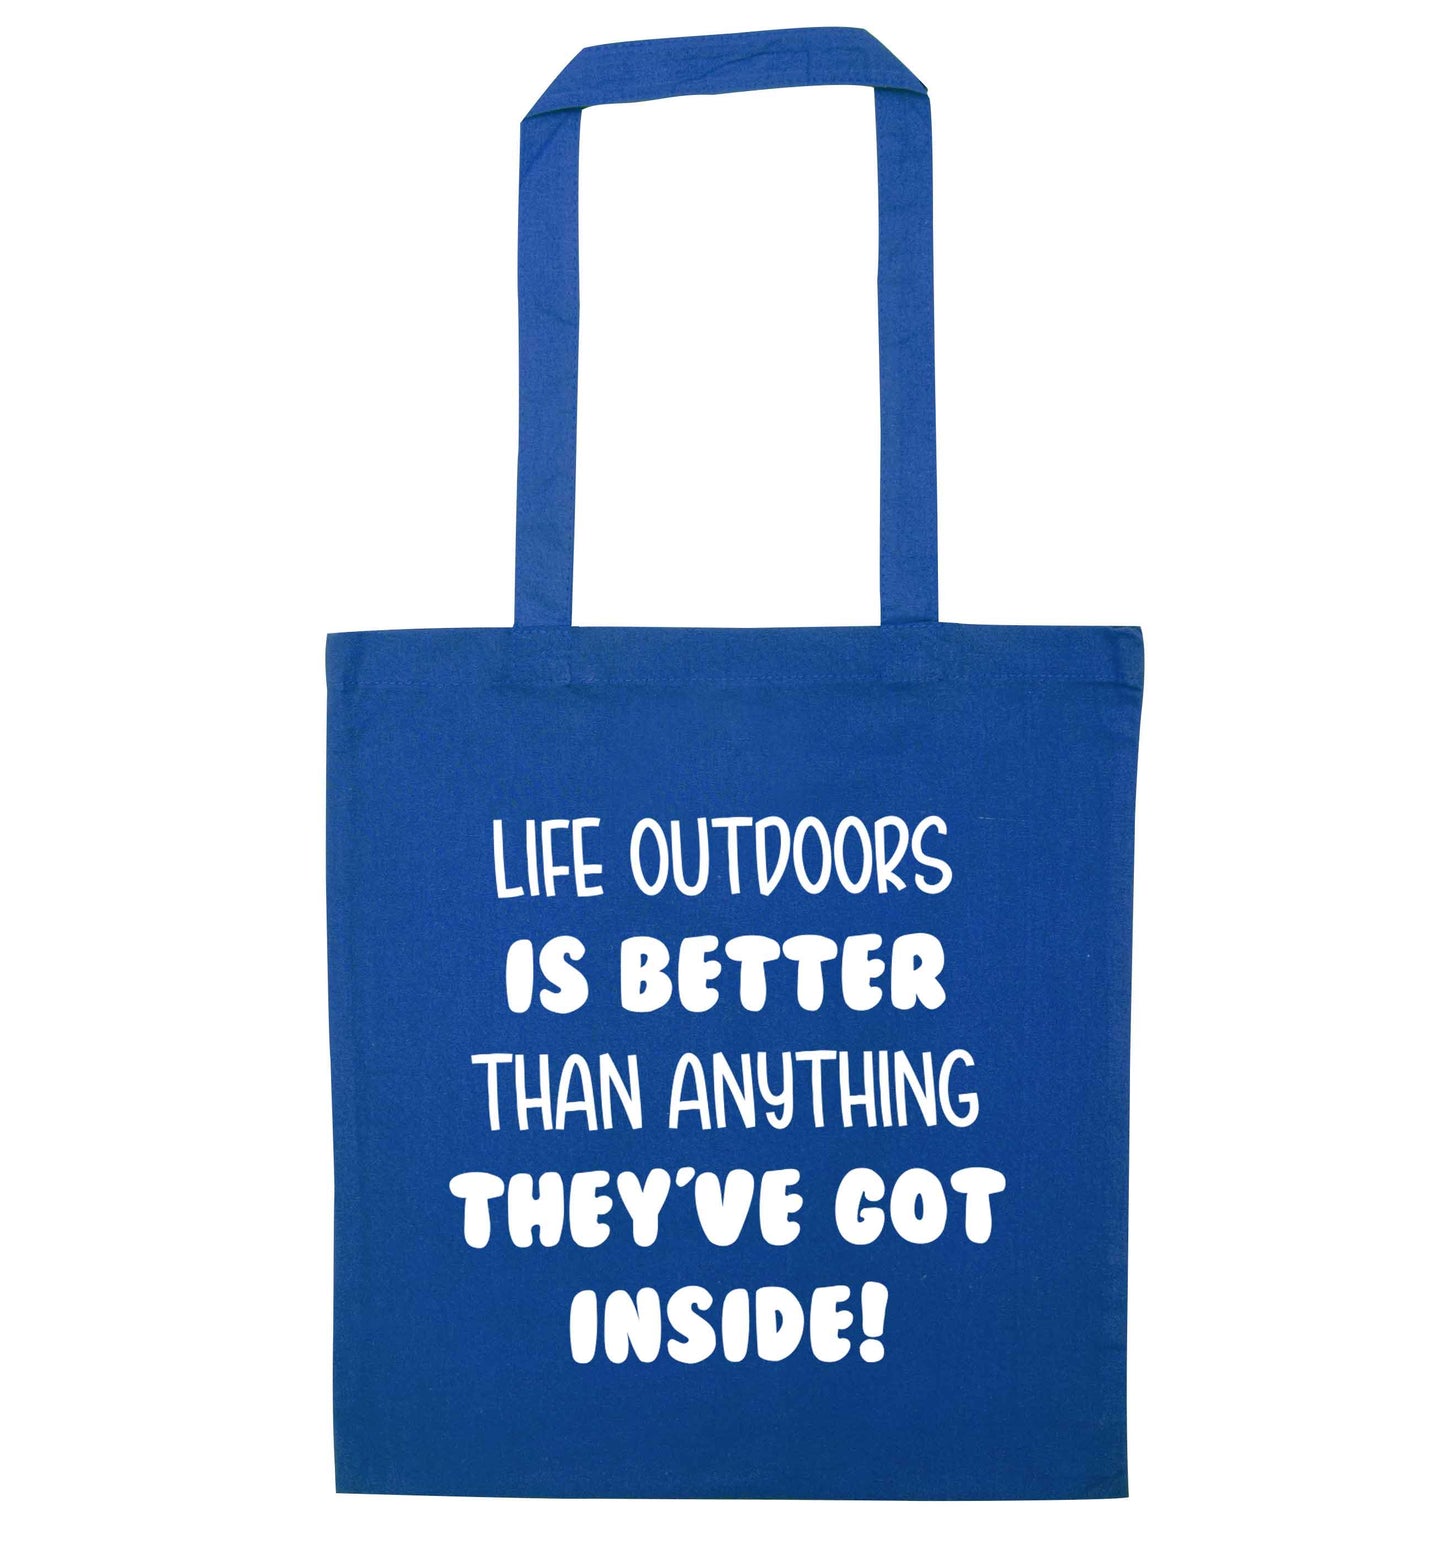 Life outdoors is better than anything they've go inside blue tote bag